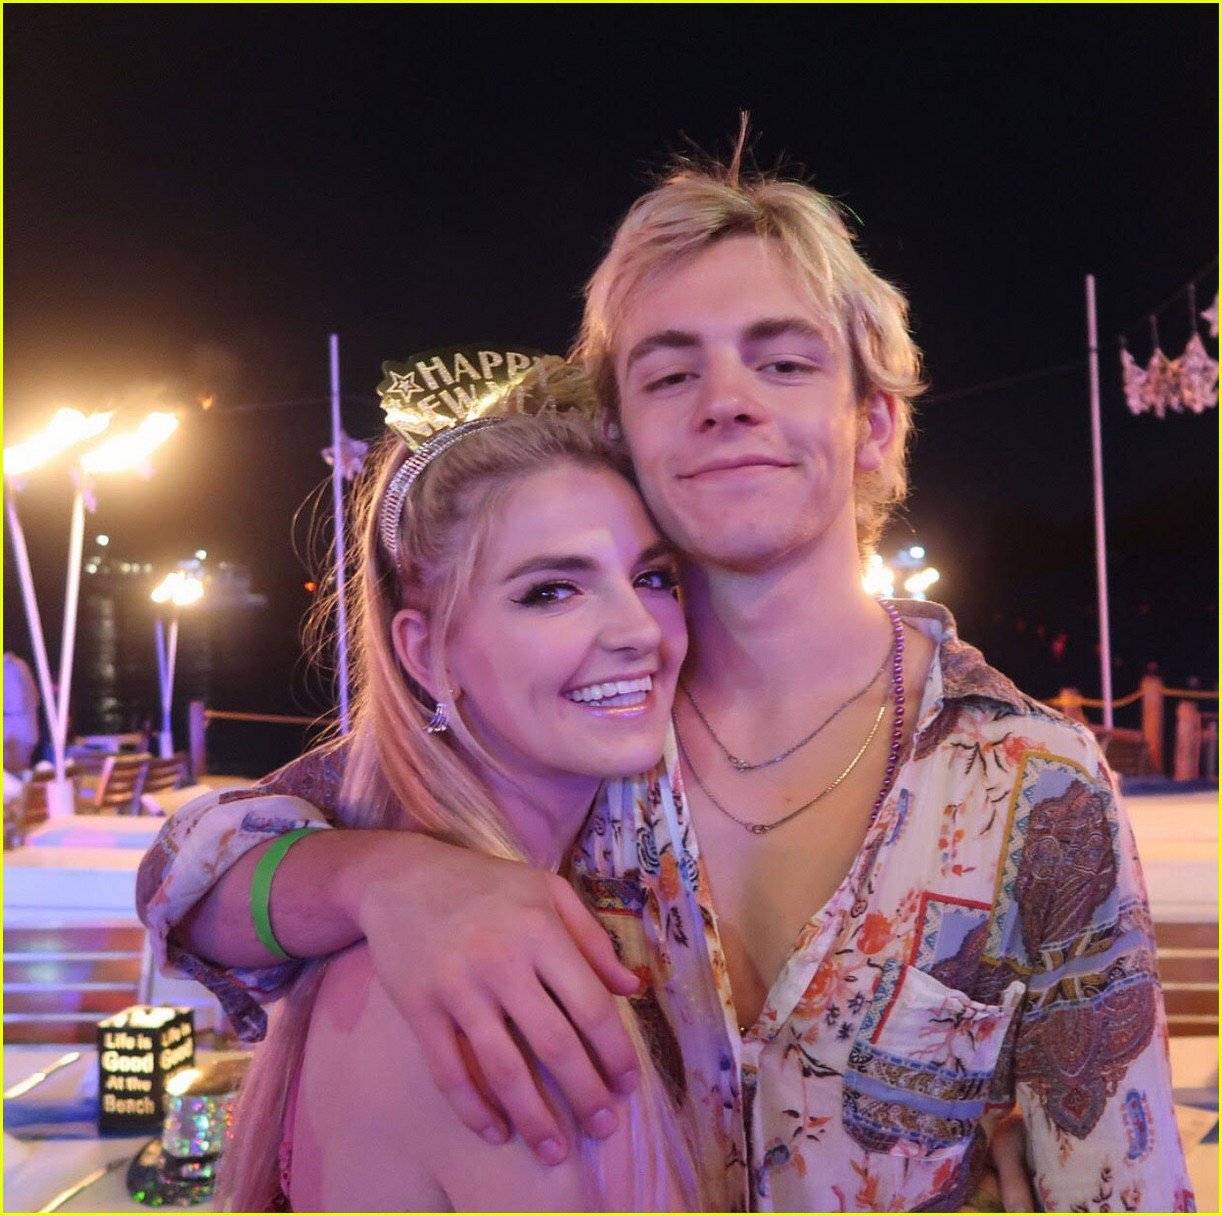 Lynch life real dating 2018 is in who ross Ross Lynch’s